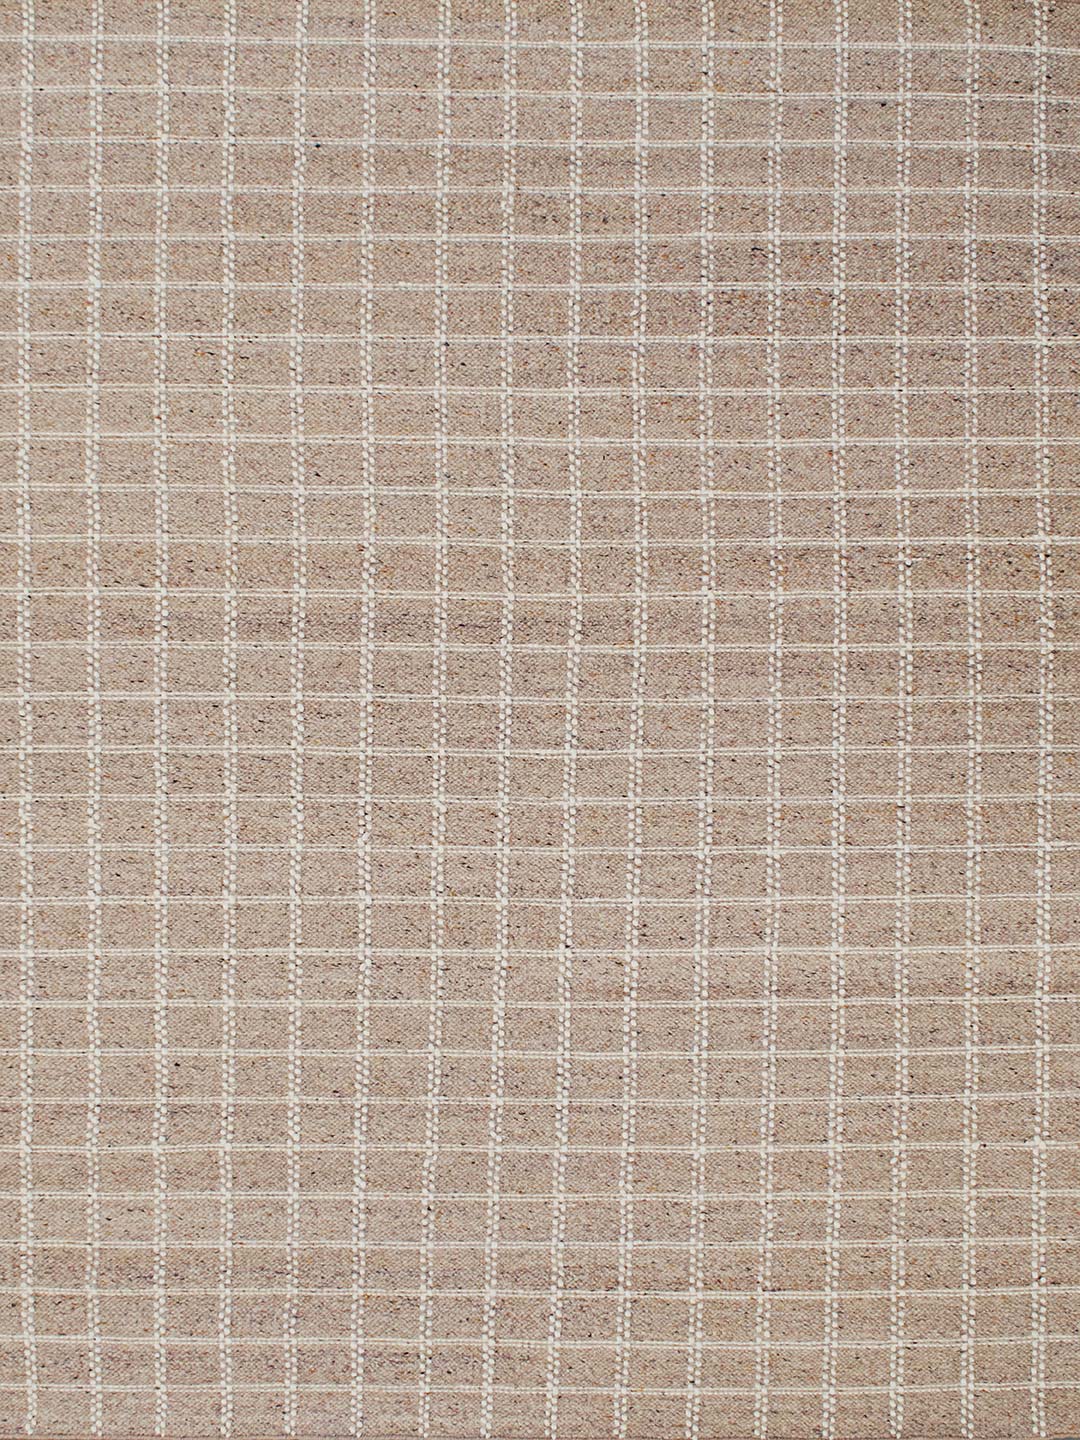 bellevue rug caramel overhead tallira by the rug collection